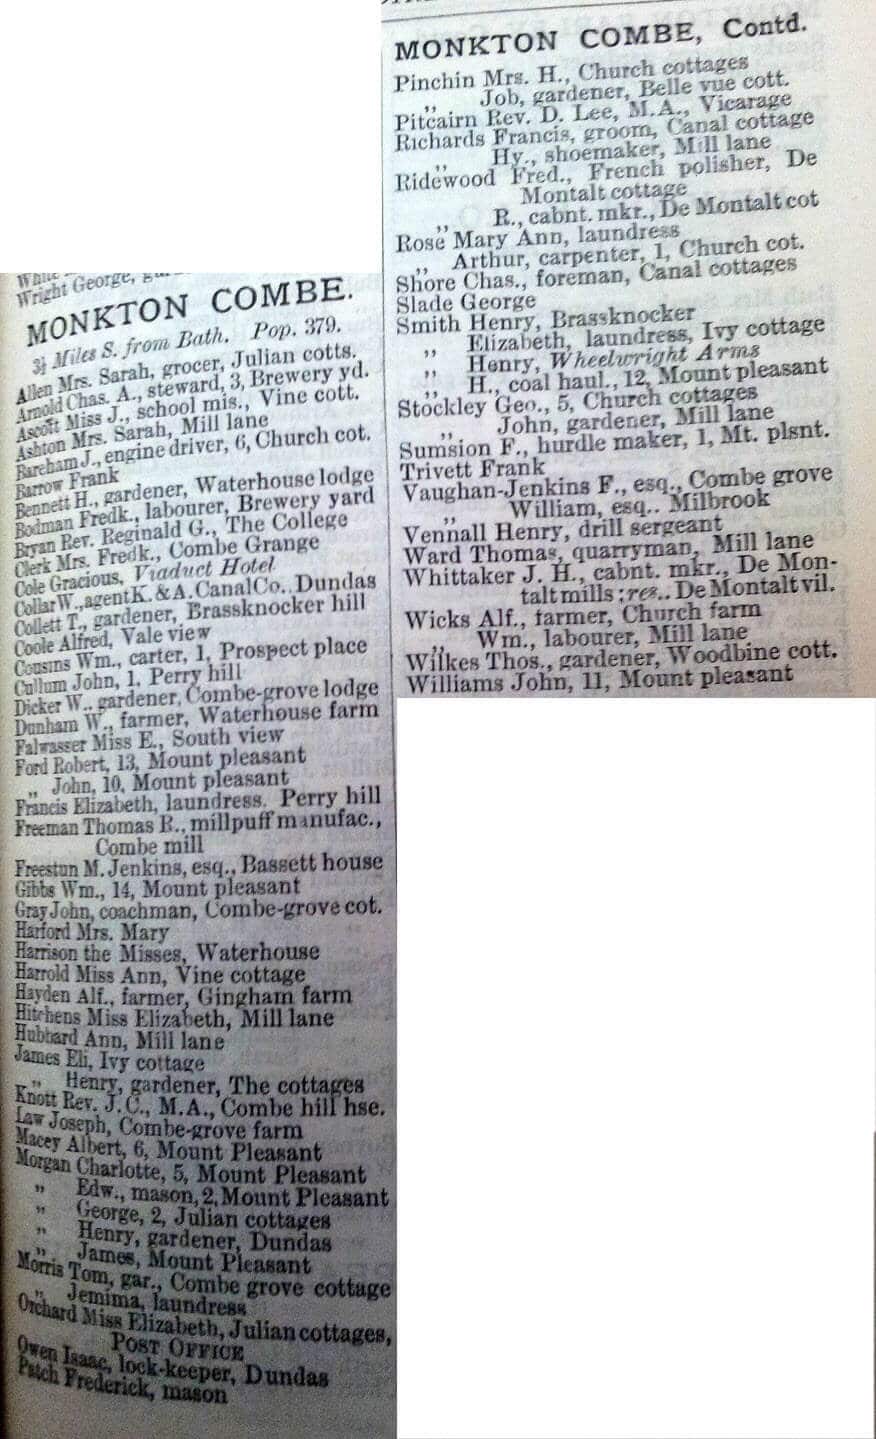 1886 post office directory for monkton combe